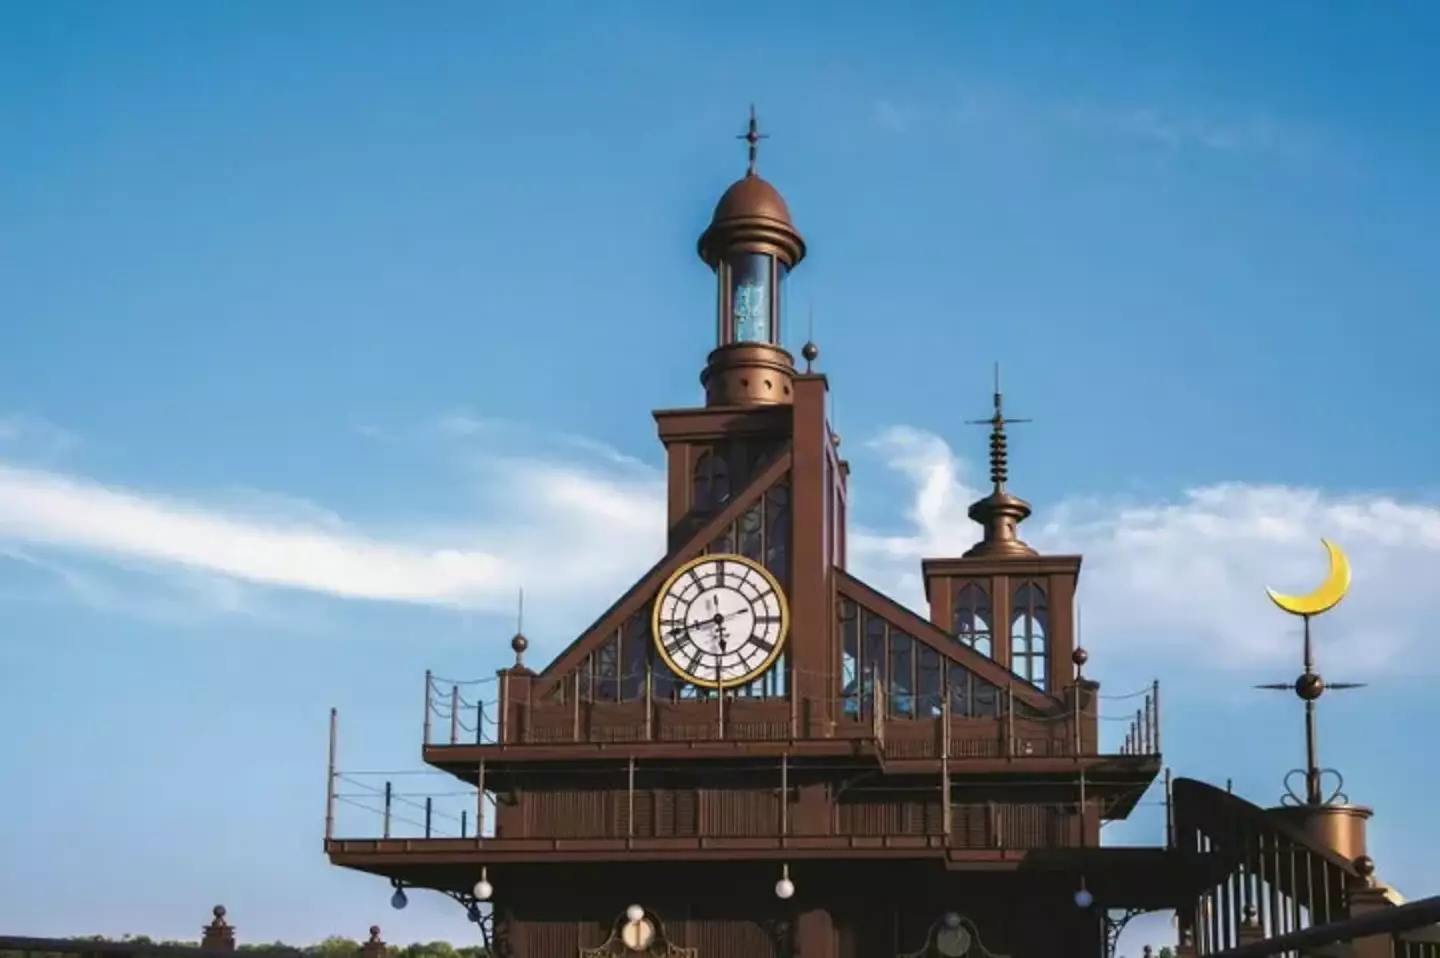 Sets and locations from the classic Studio Ghibli movies have been lovingly recreated.